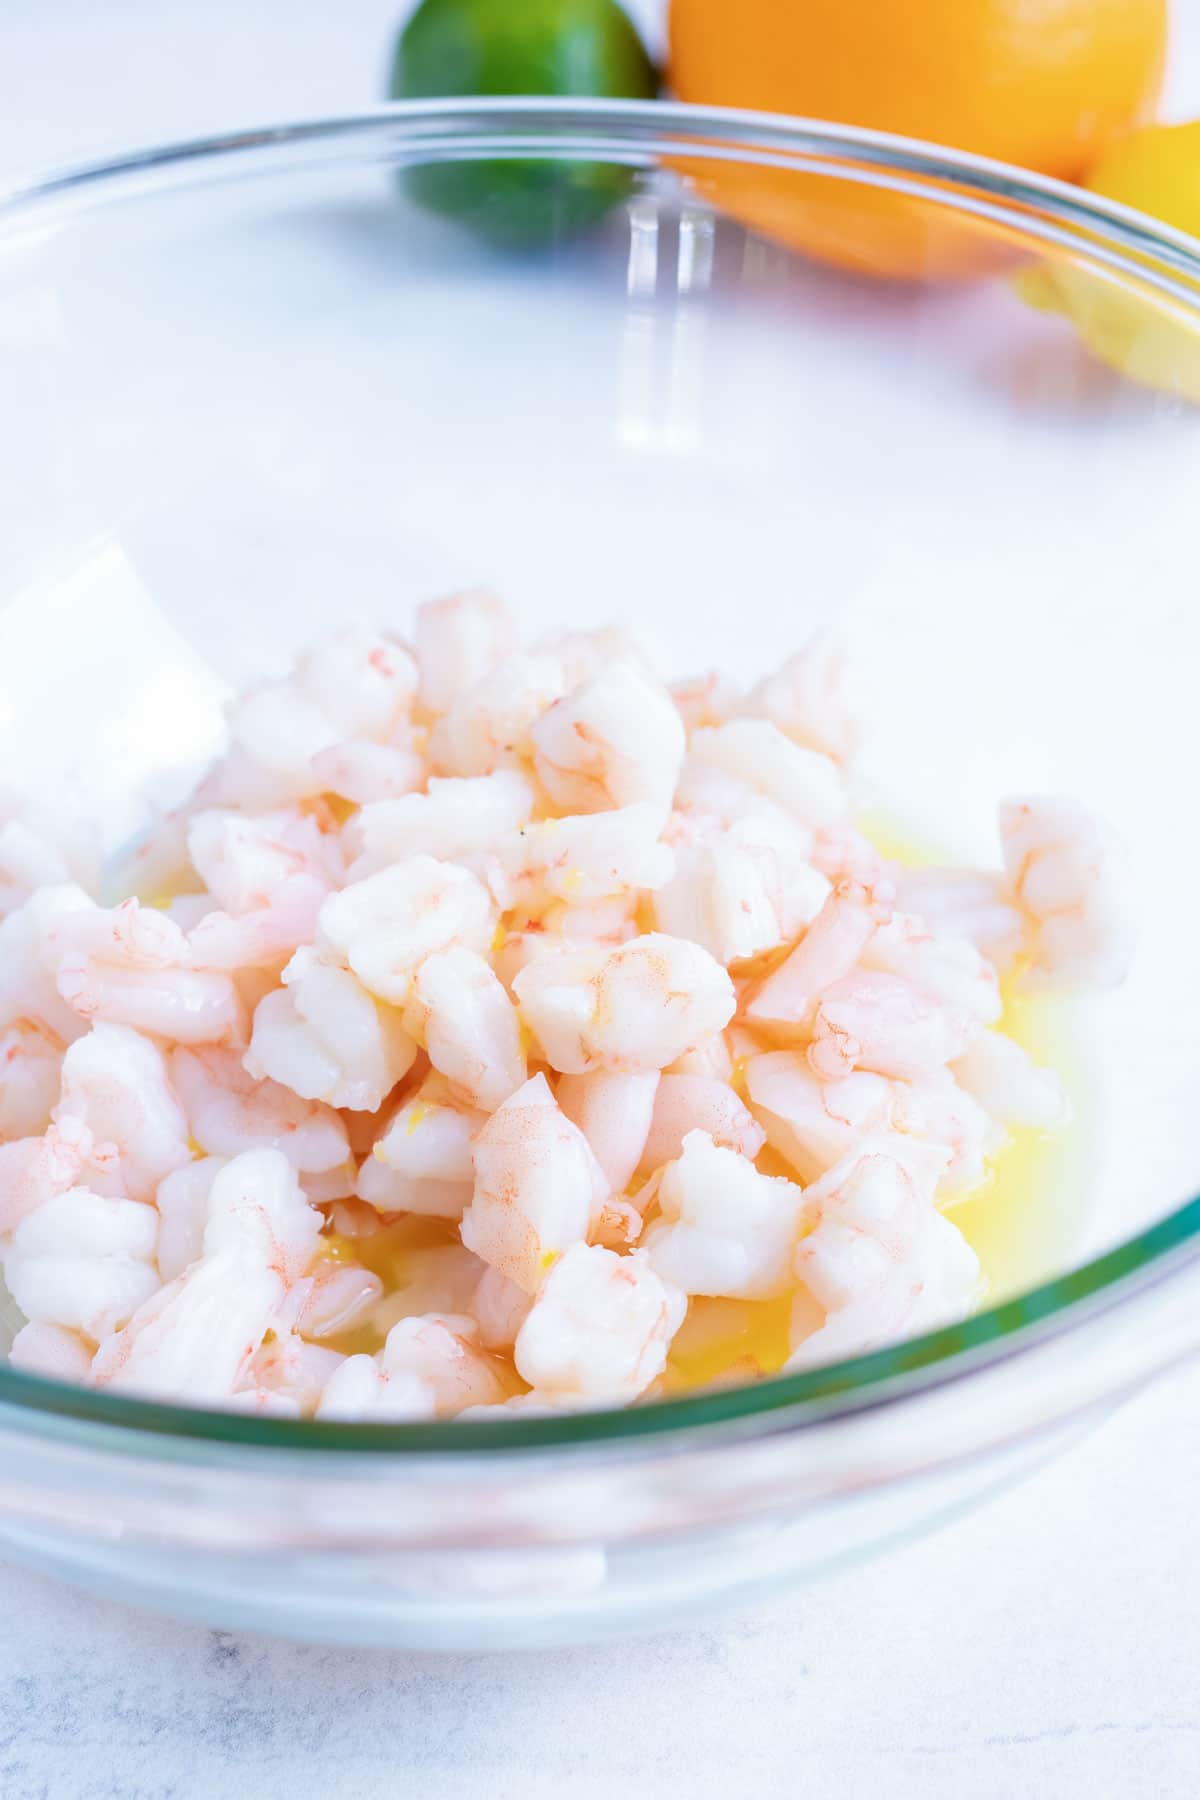 Chopped pink shrimp sits in a glass bowl of citrus marinade.